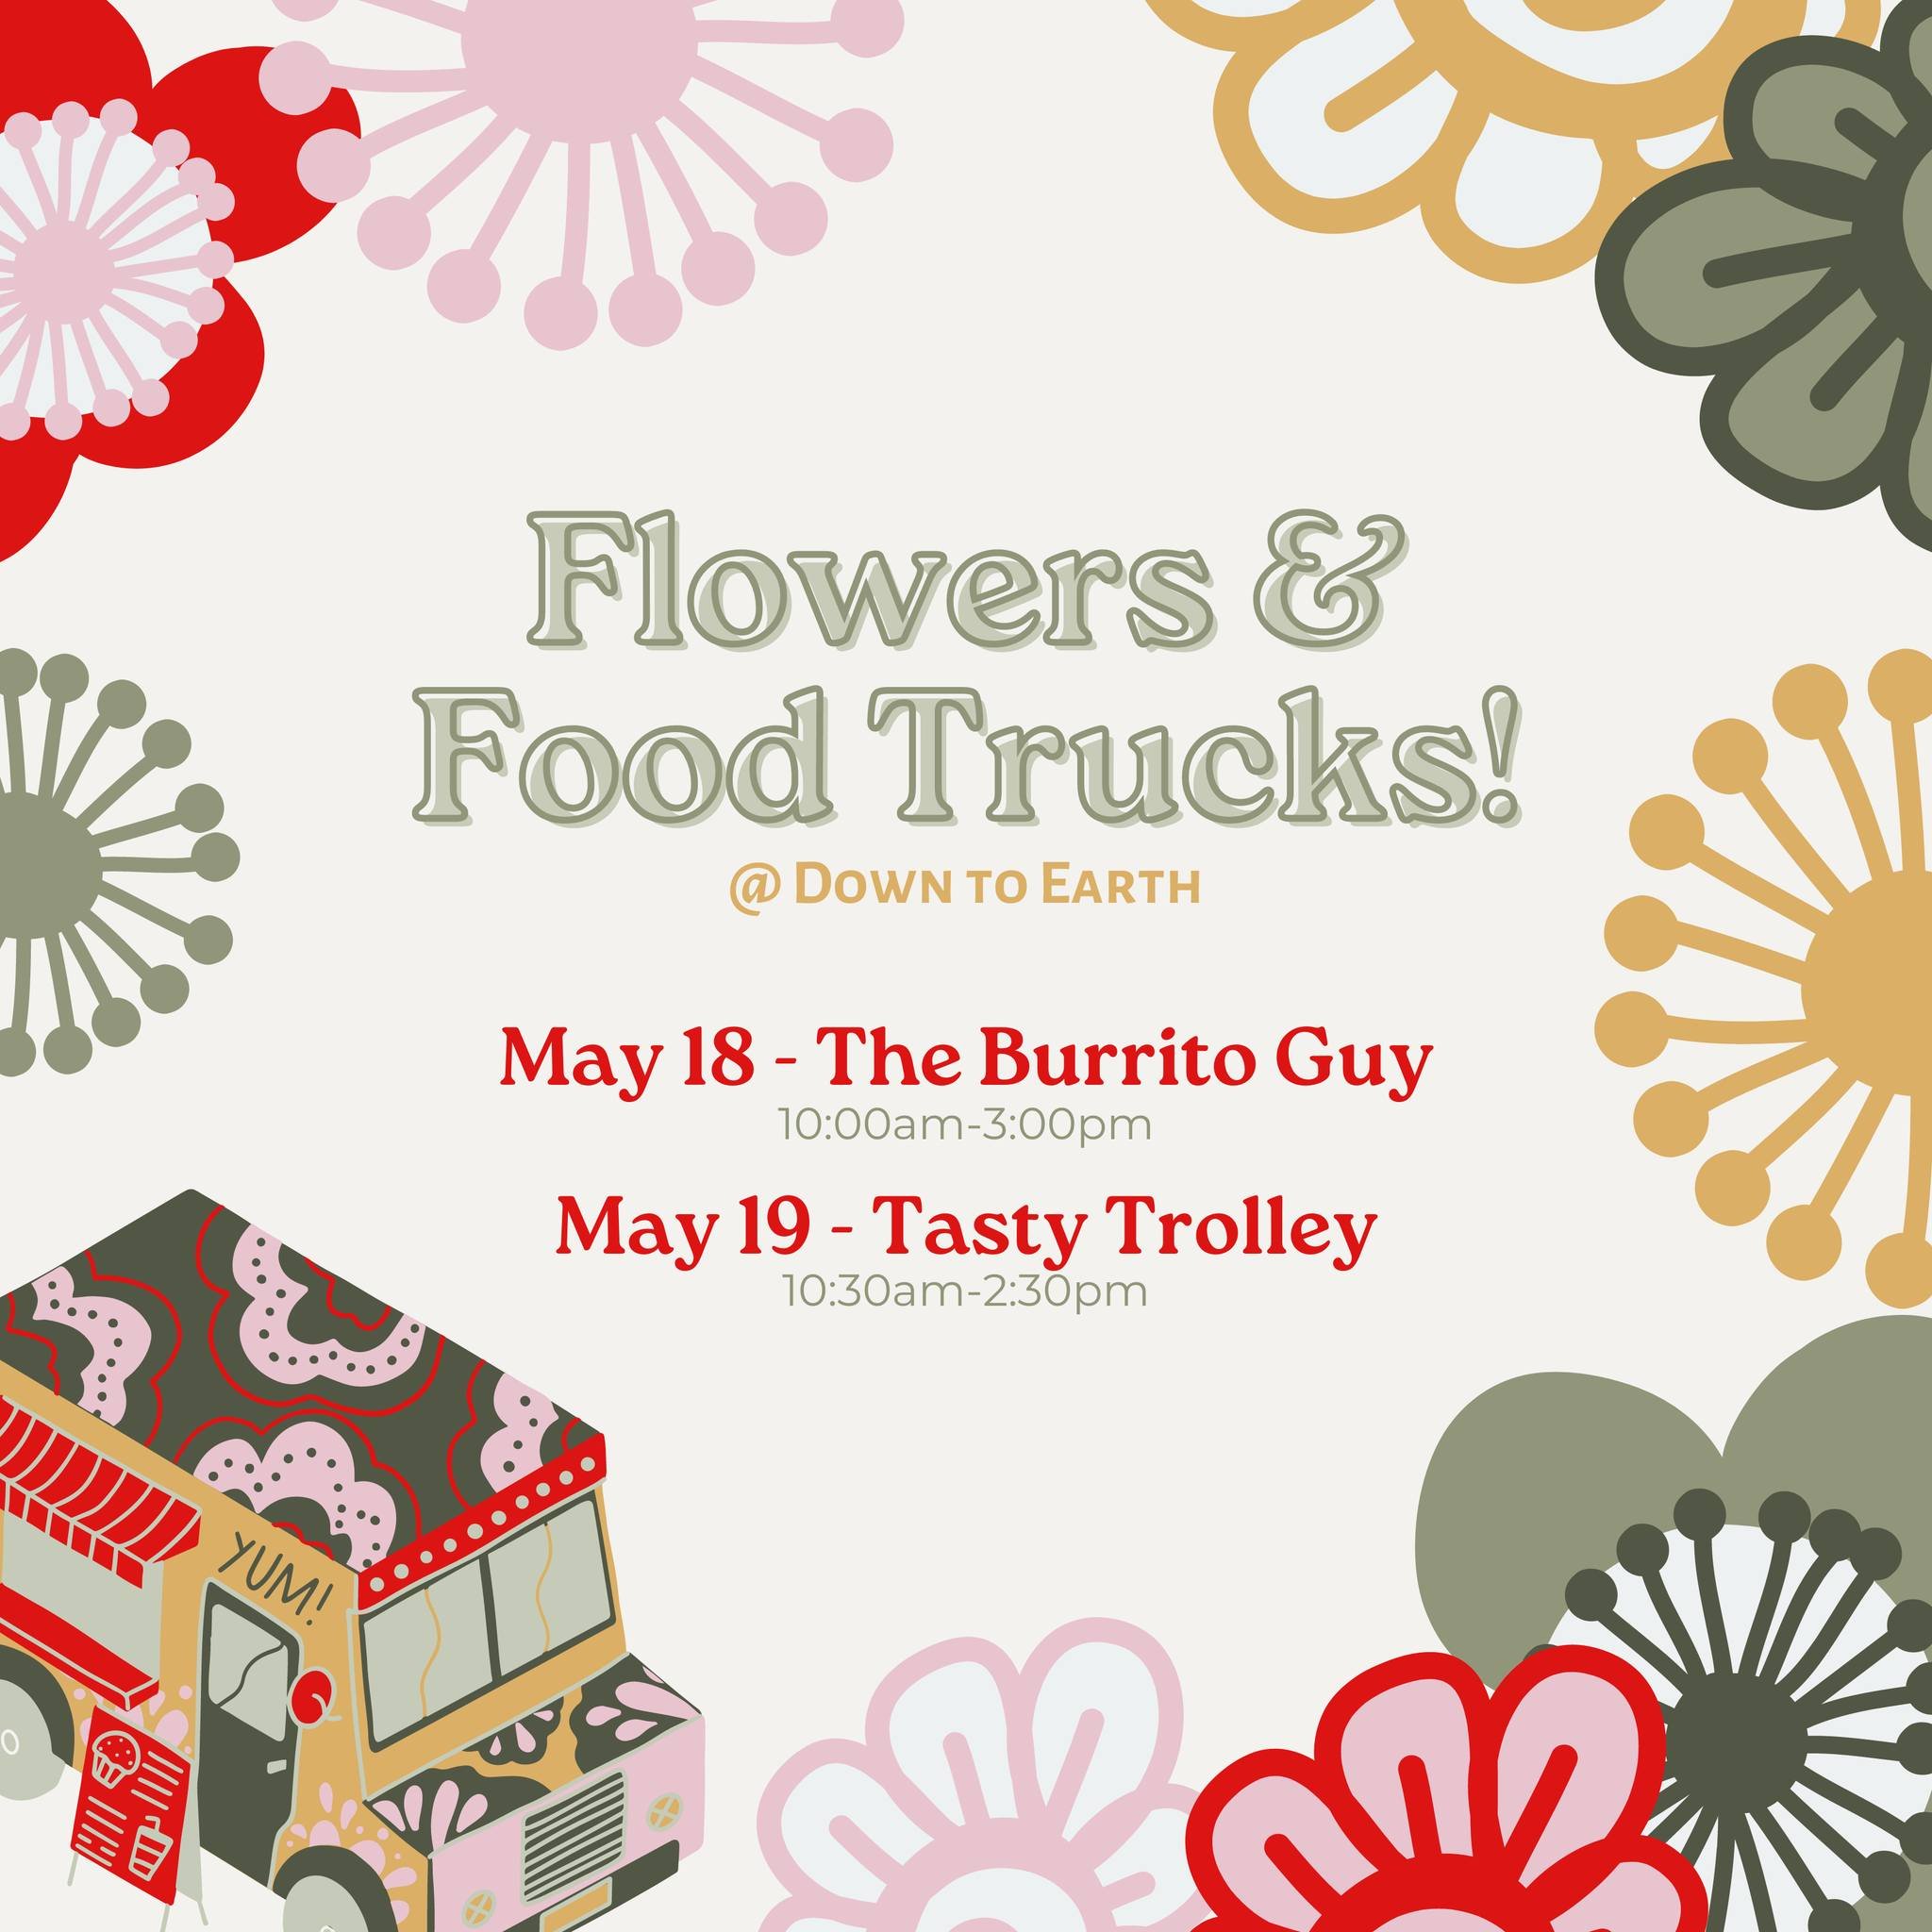 Coming up this Weekend! Flowers + Food Trucks is back for another beautiful May weekend! 🌸🥰

Saturday, May 18th: The Burrito Guy - Enjoy burritos, street tacos, and more!
Sunday, May 19th: The Tasty Trolley - Enjoy pulled pork, nachos, walking taco